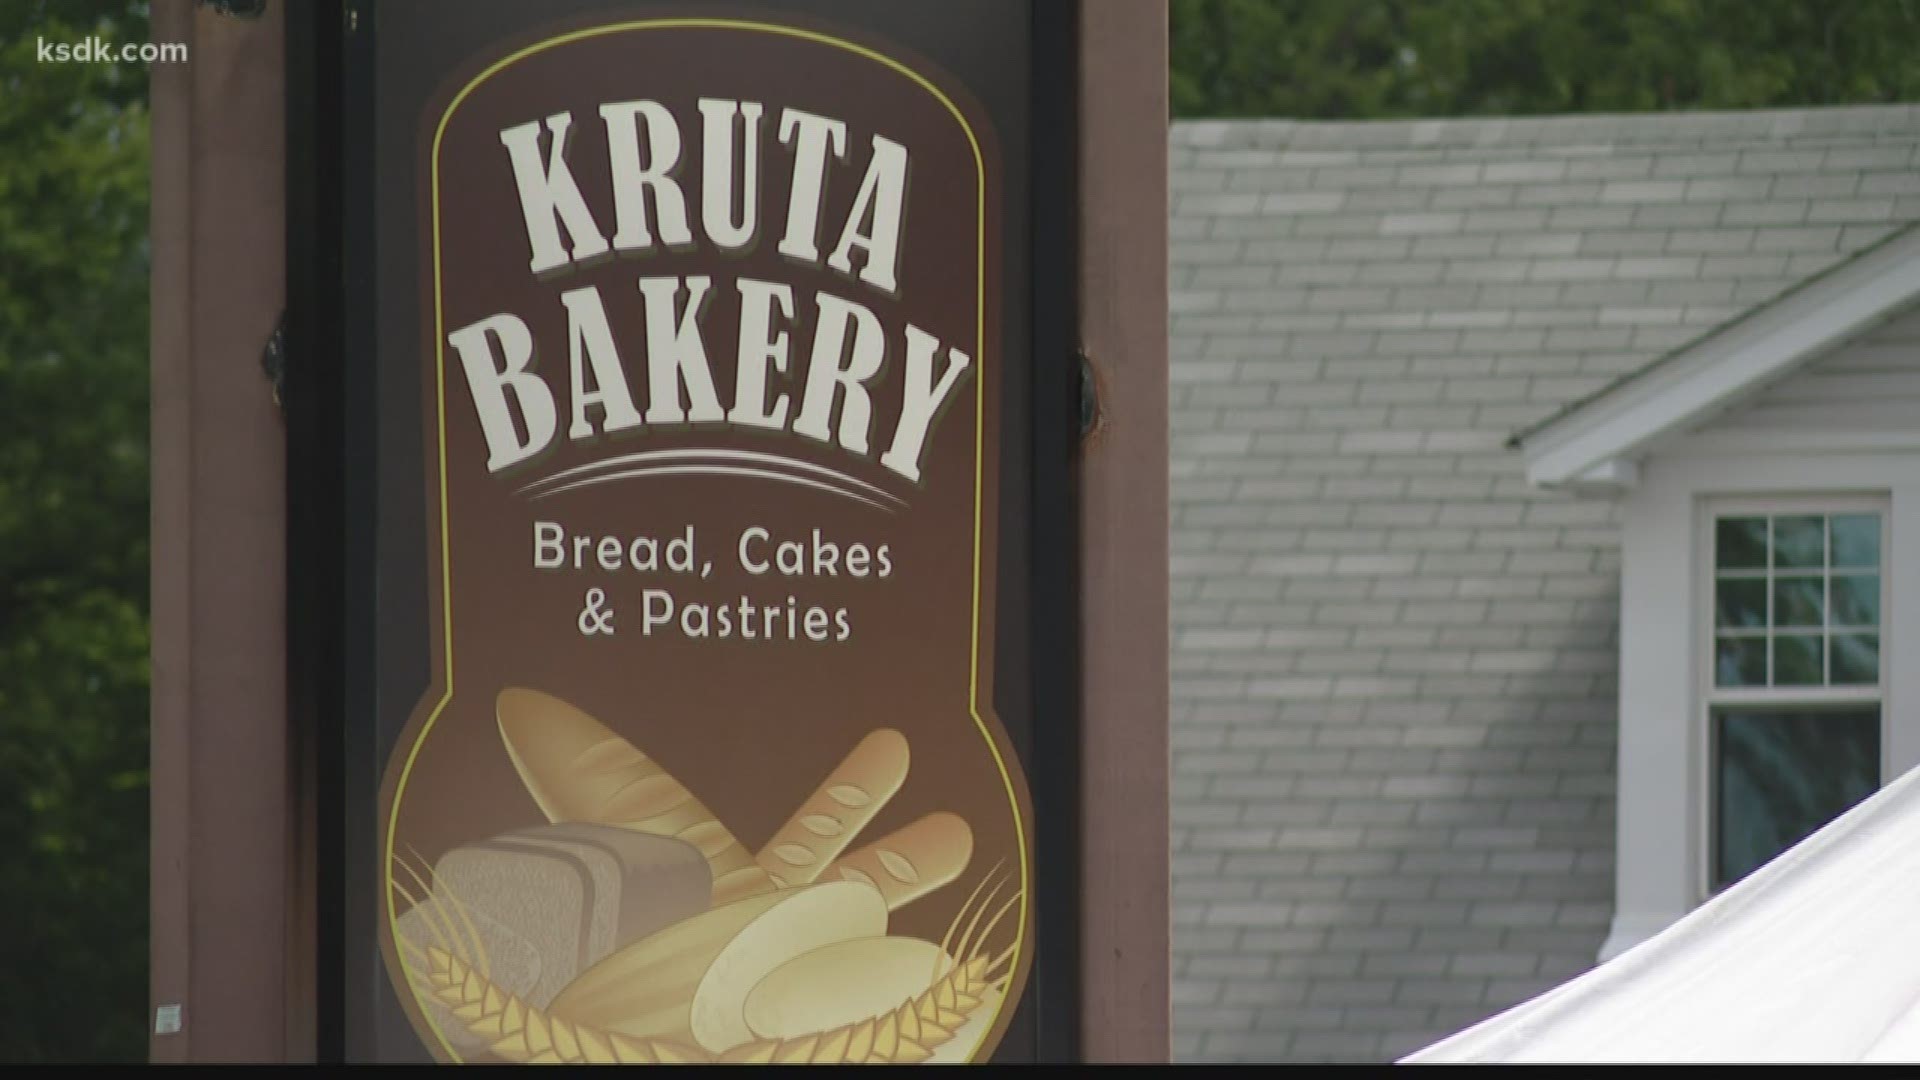 Kruta's has been delighting customers since 1919. A fourth generation is now running the business, still using some of the original recipes.